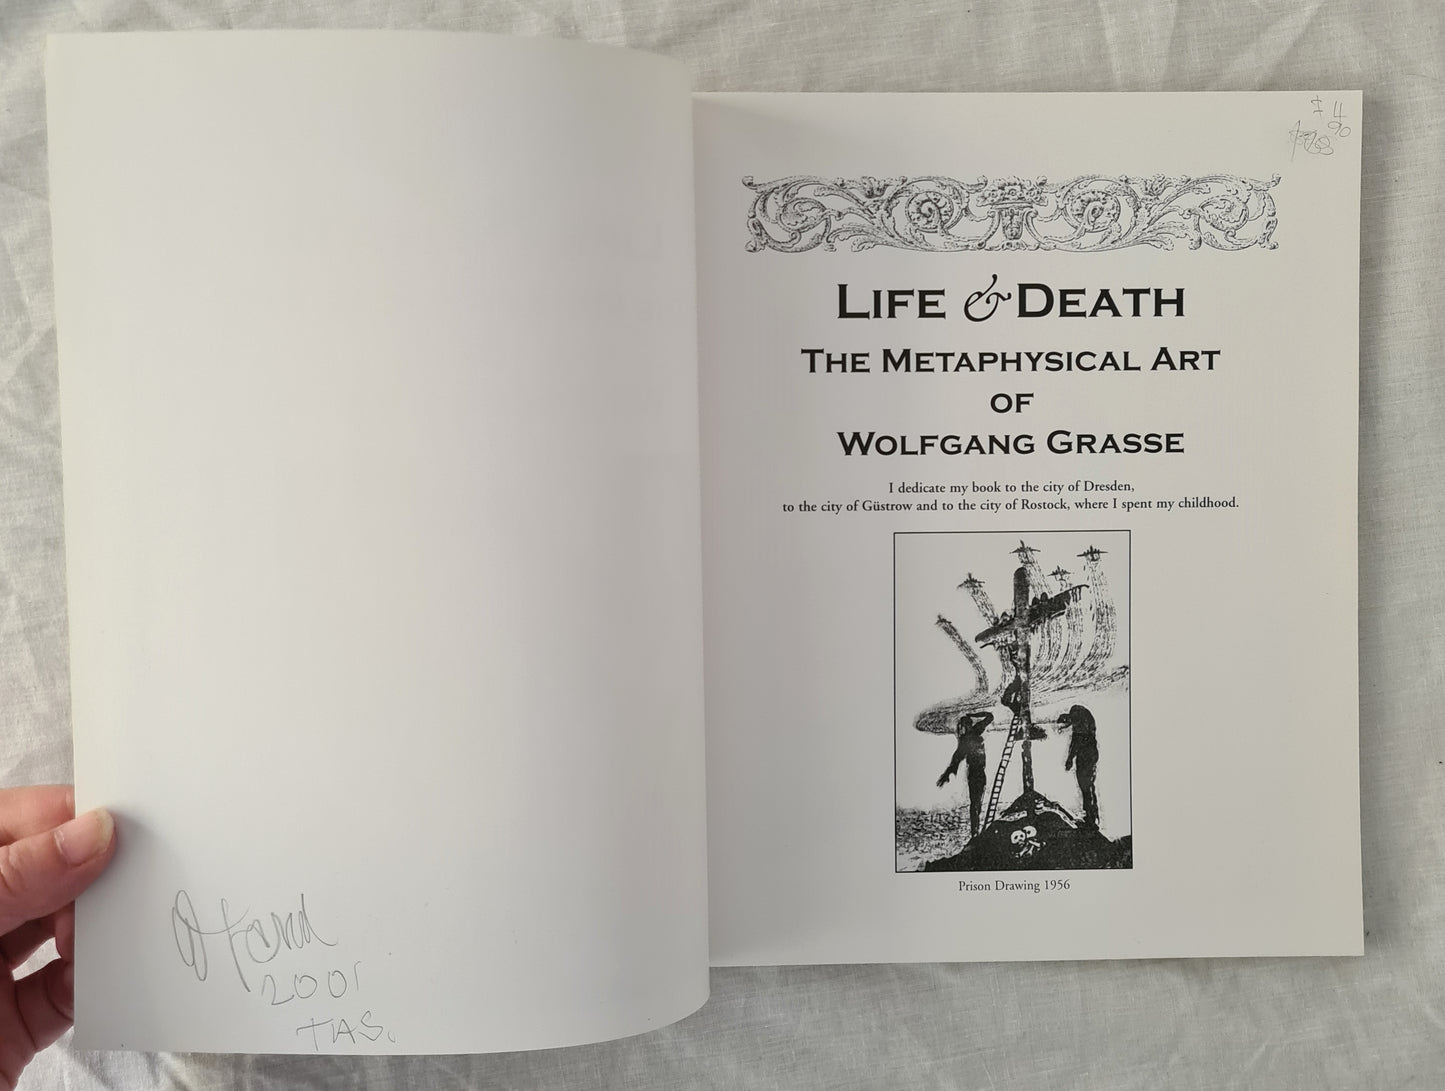 Life & Death The Metaphysical Art of Wolfgang Grasse